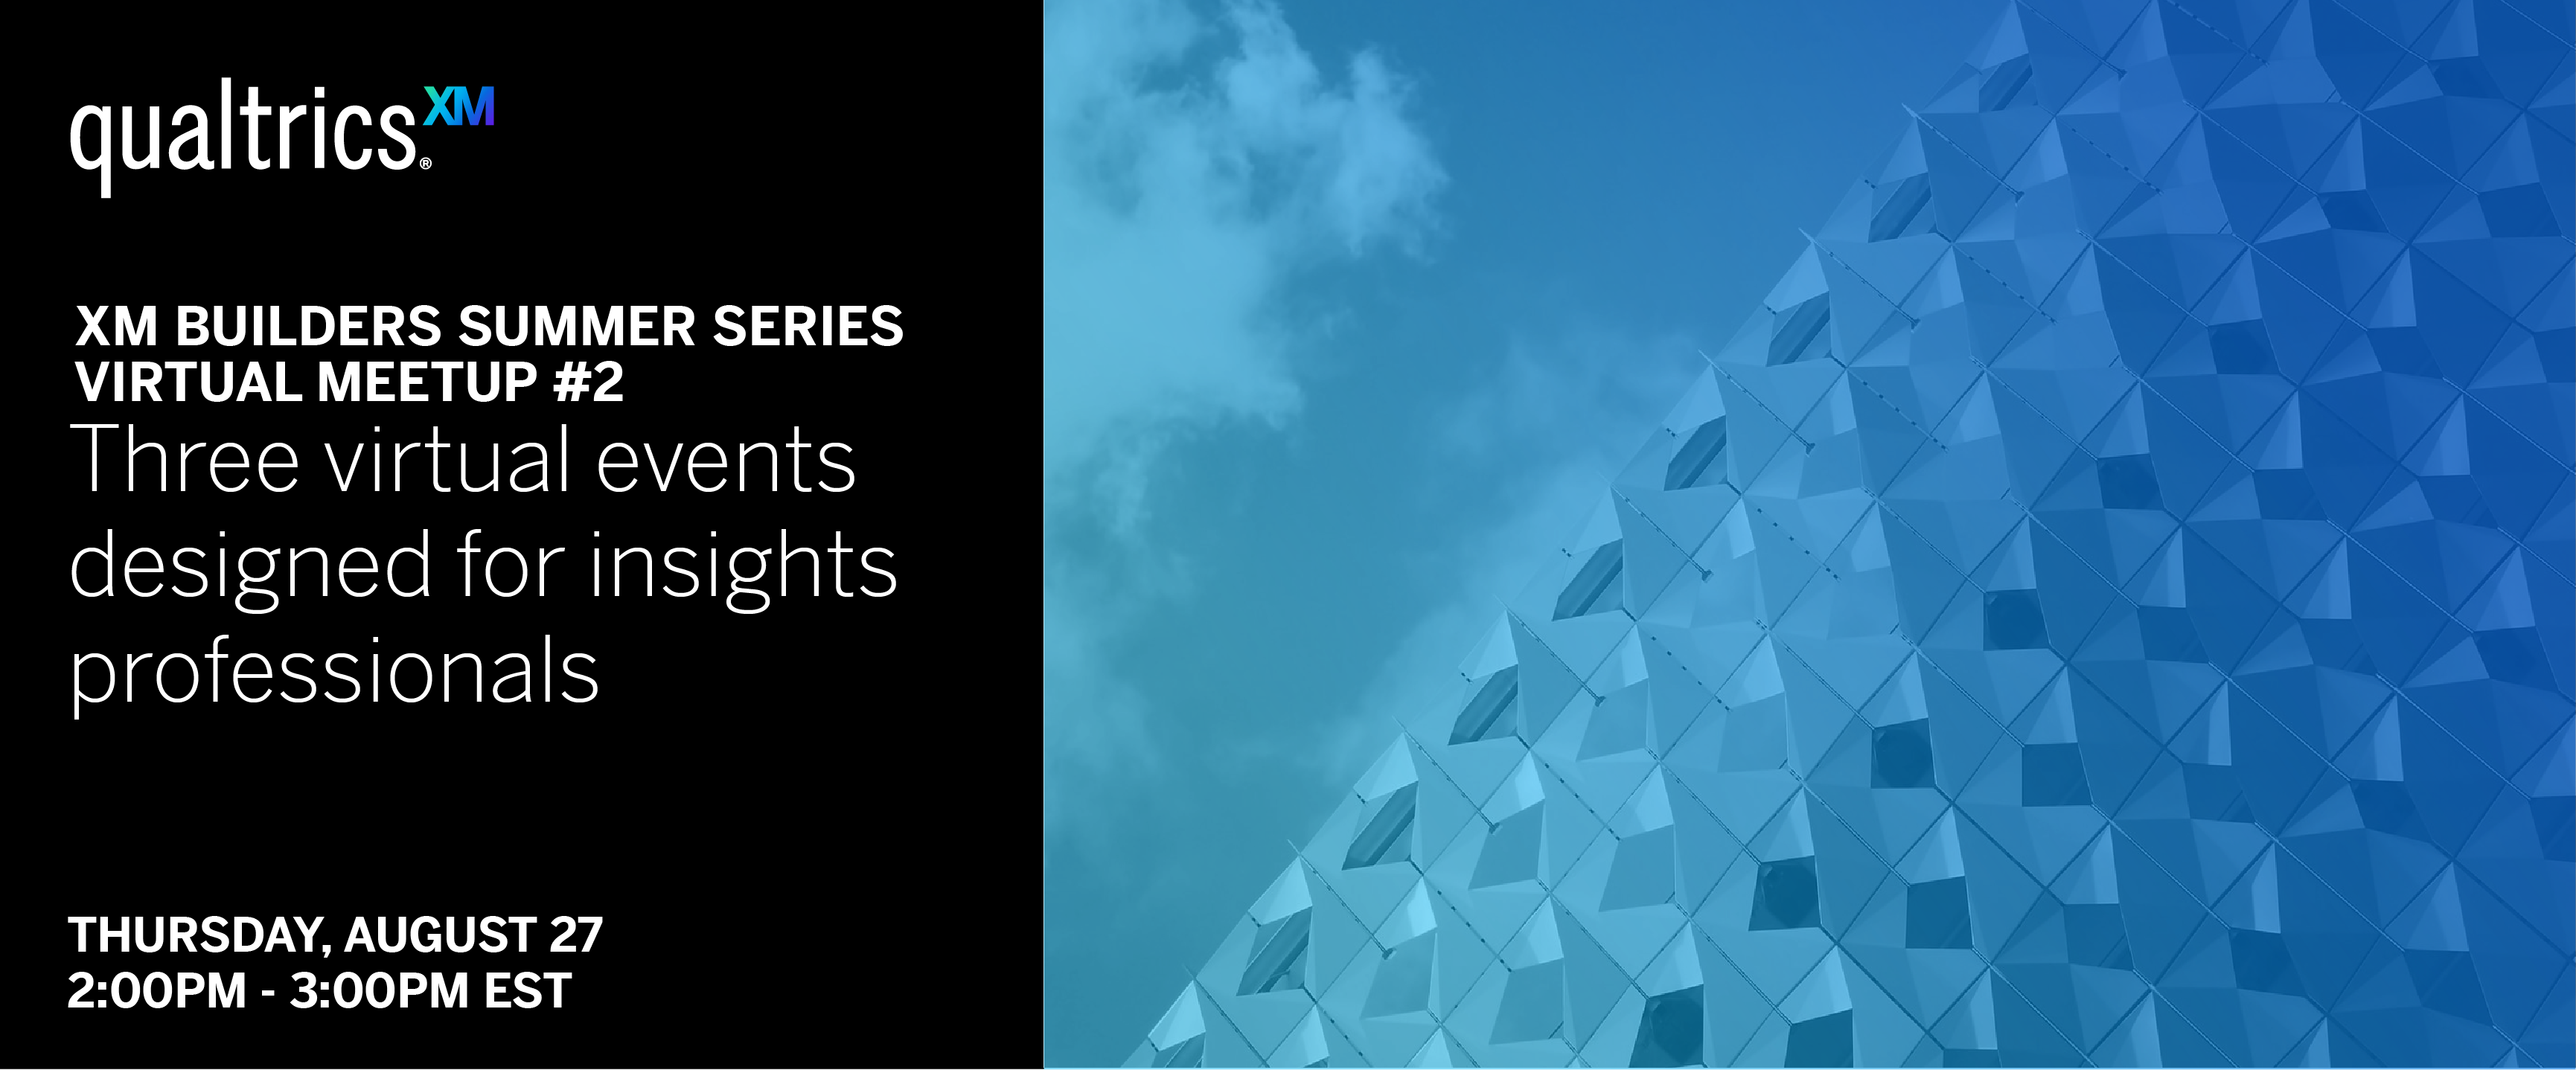 Qualtrics XM Builders Summer Series Virtual Meetup #2. Three virtual events designed for insights professionals. Thursday, August 27 2:00 PM - 3:00 PM EST